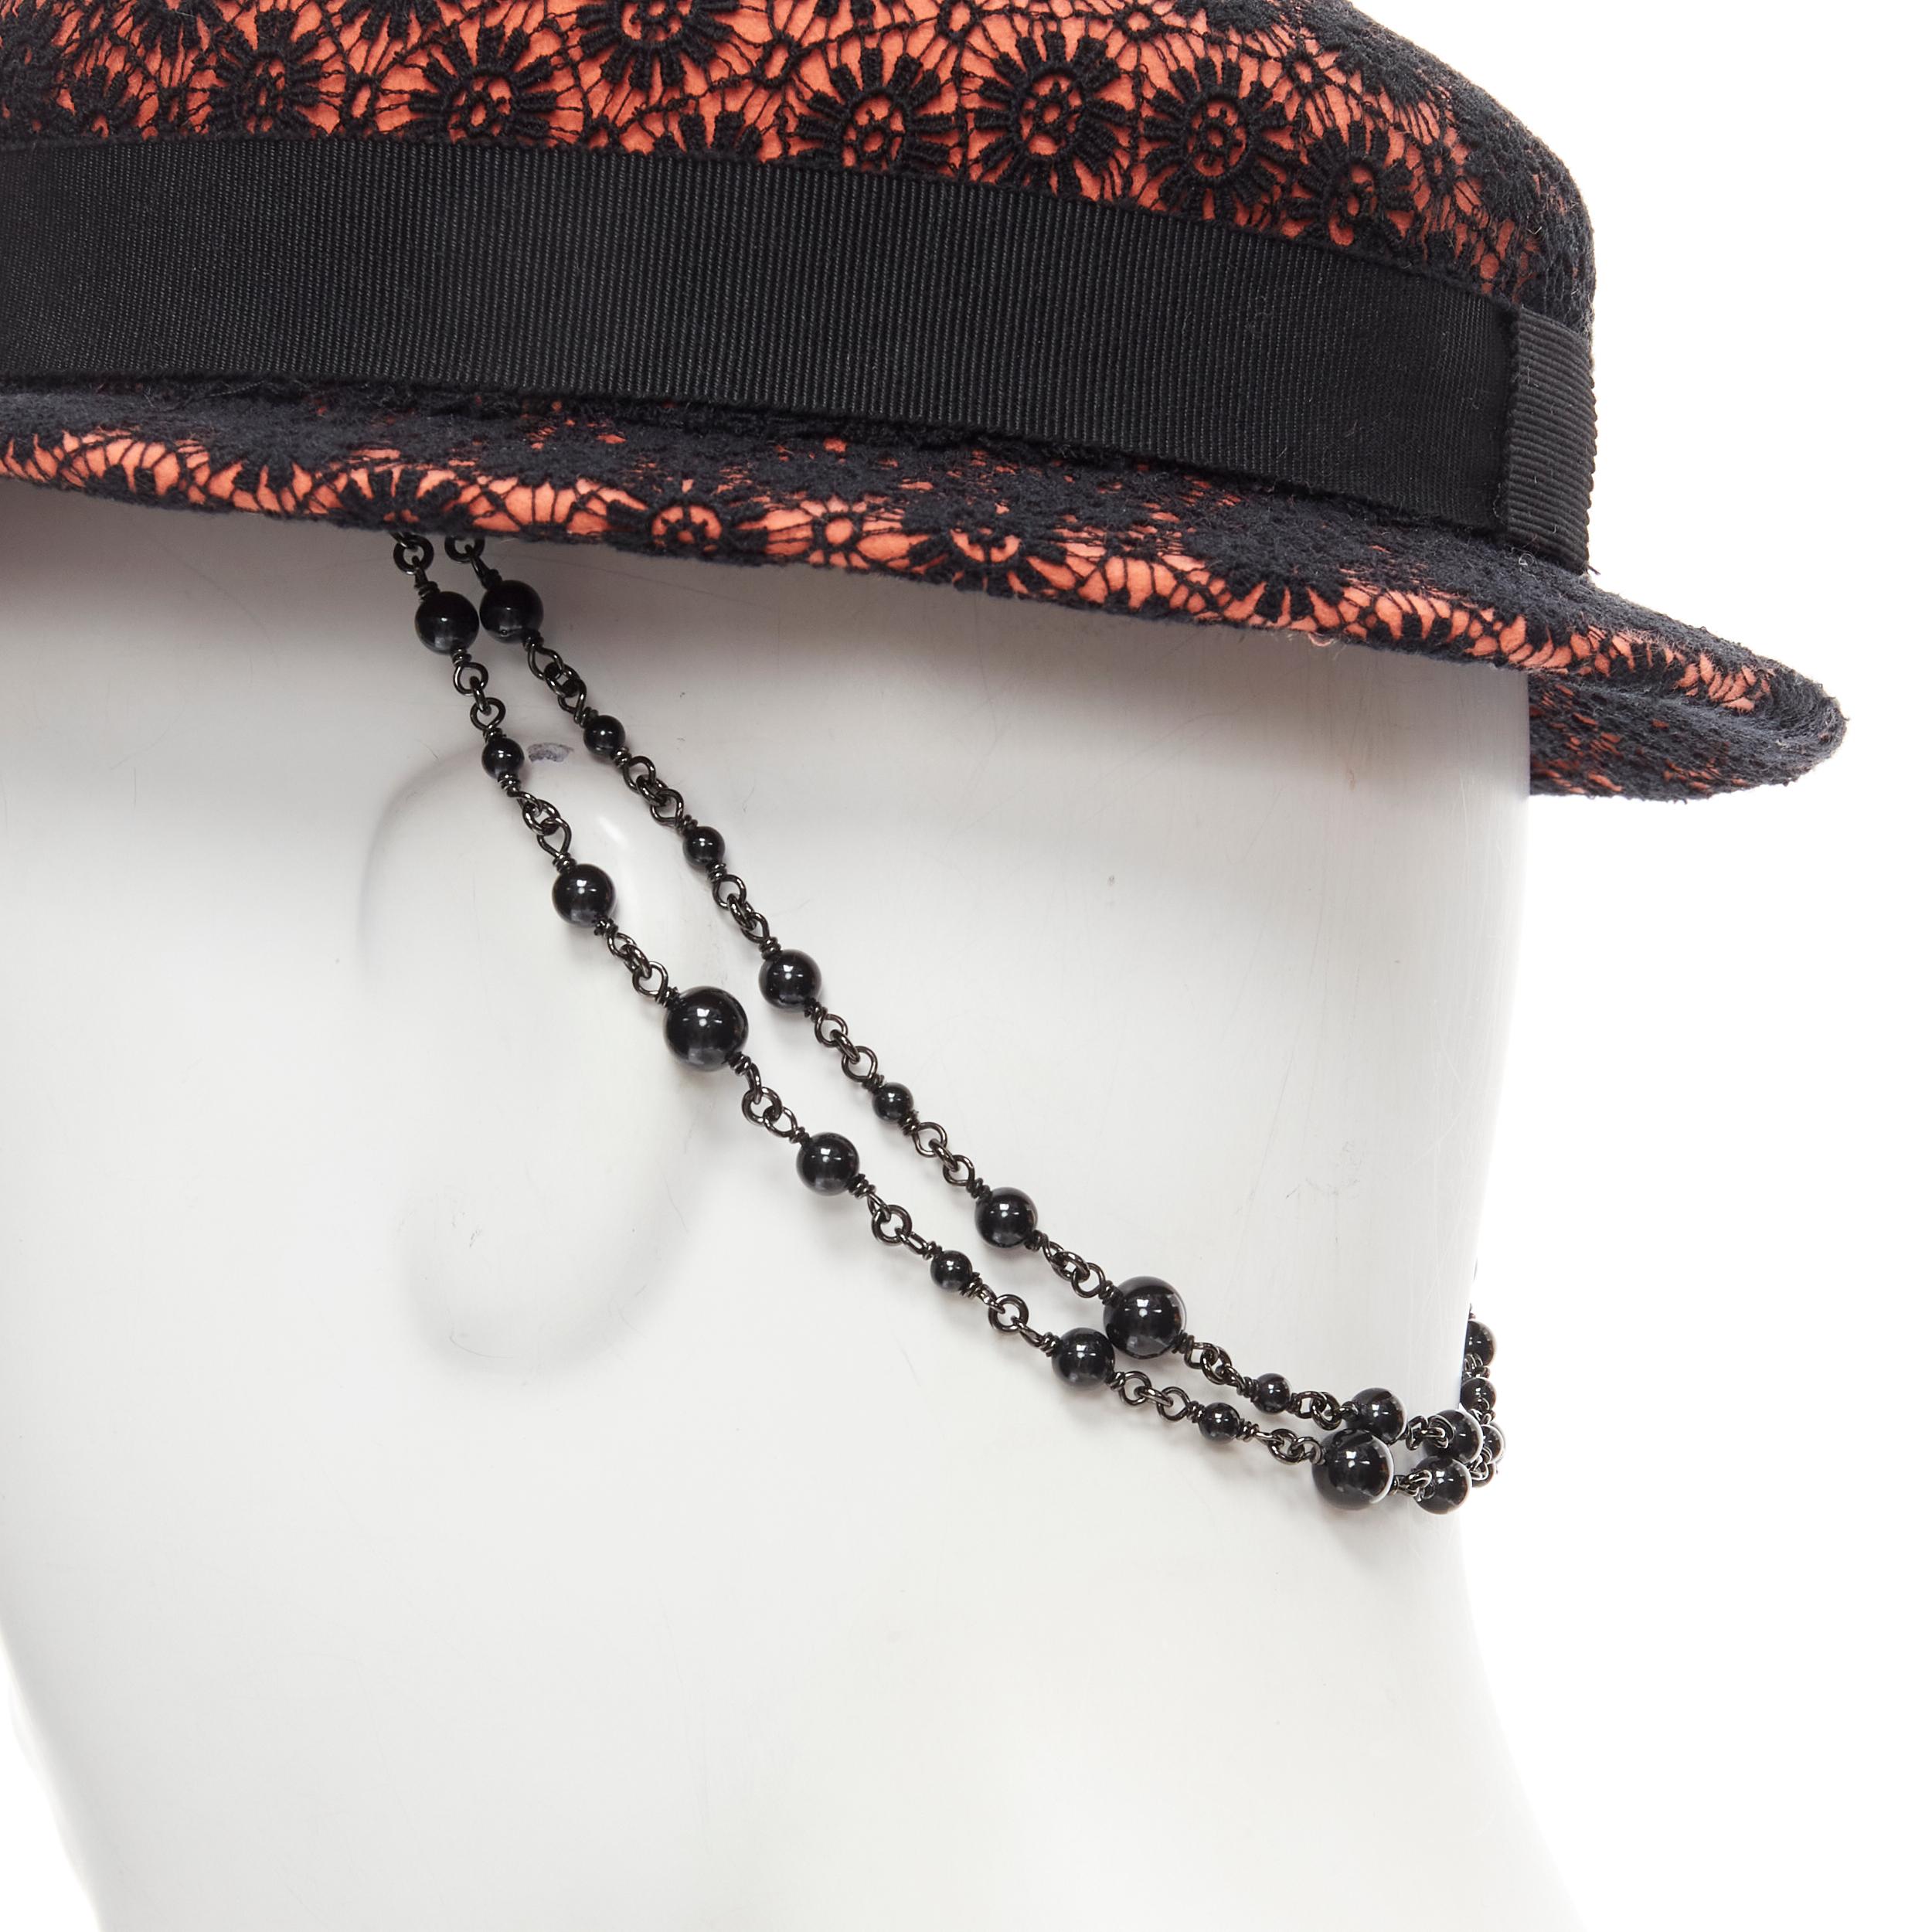 MAISON MICHEL black floral lace orange felt black pearl chain topper fedora hat 52cm 
Reference: MELK/A00156 
Brand: Maison Michel 
Material: Wool 
Color: Orange 
Pattern: Floral 
Extra Detail: Black floral lace embroidery covered wool felt.